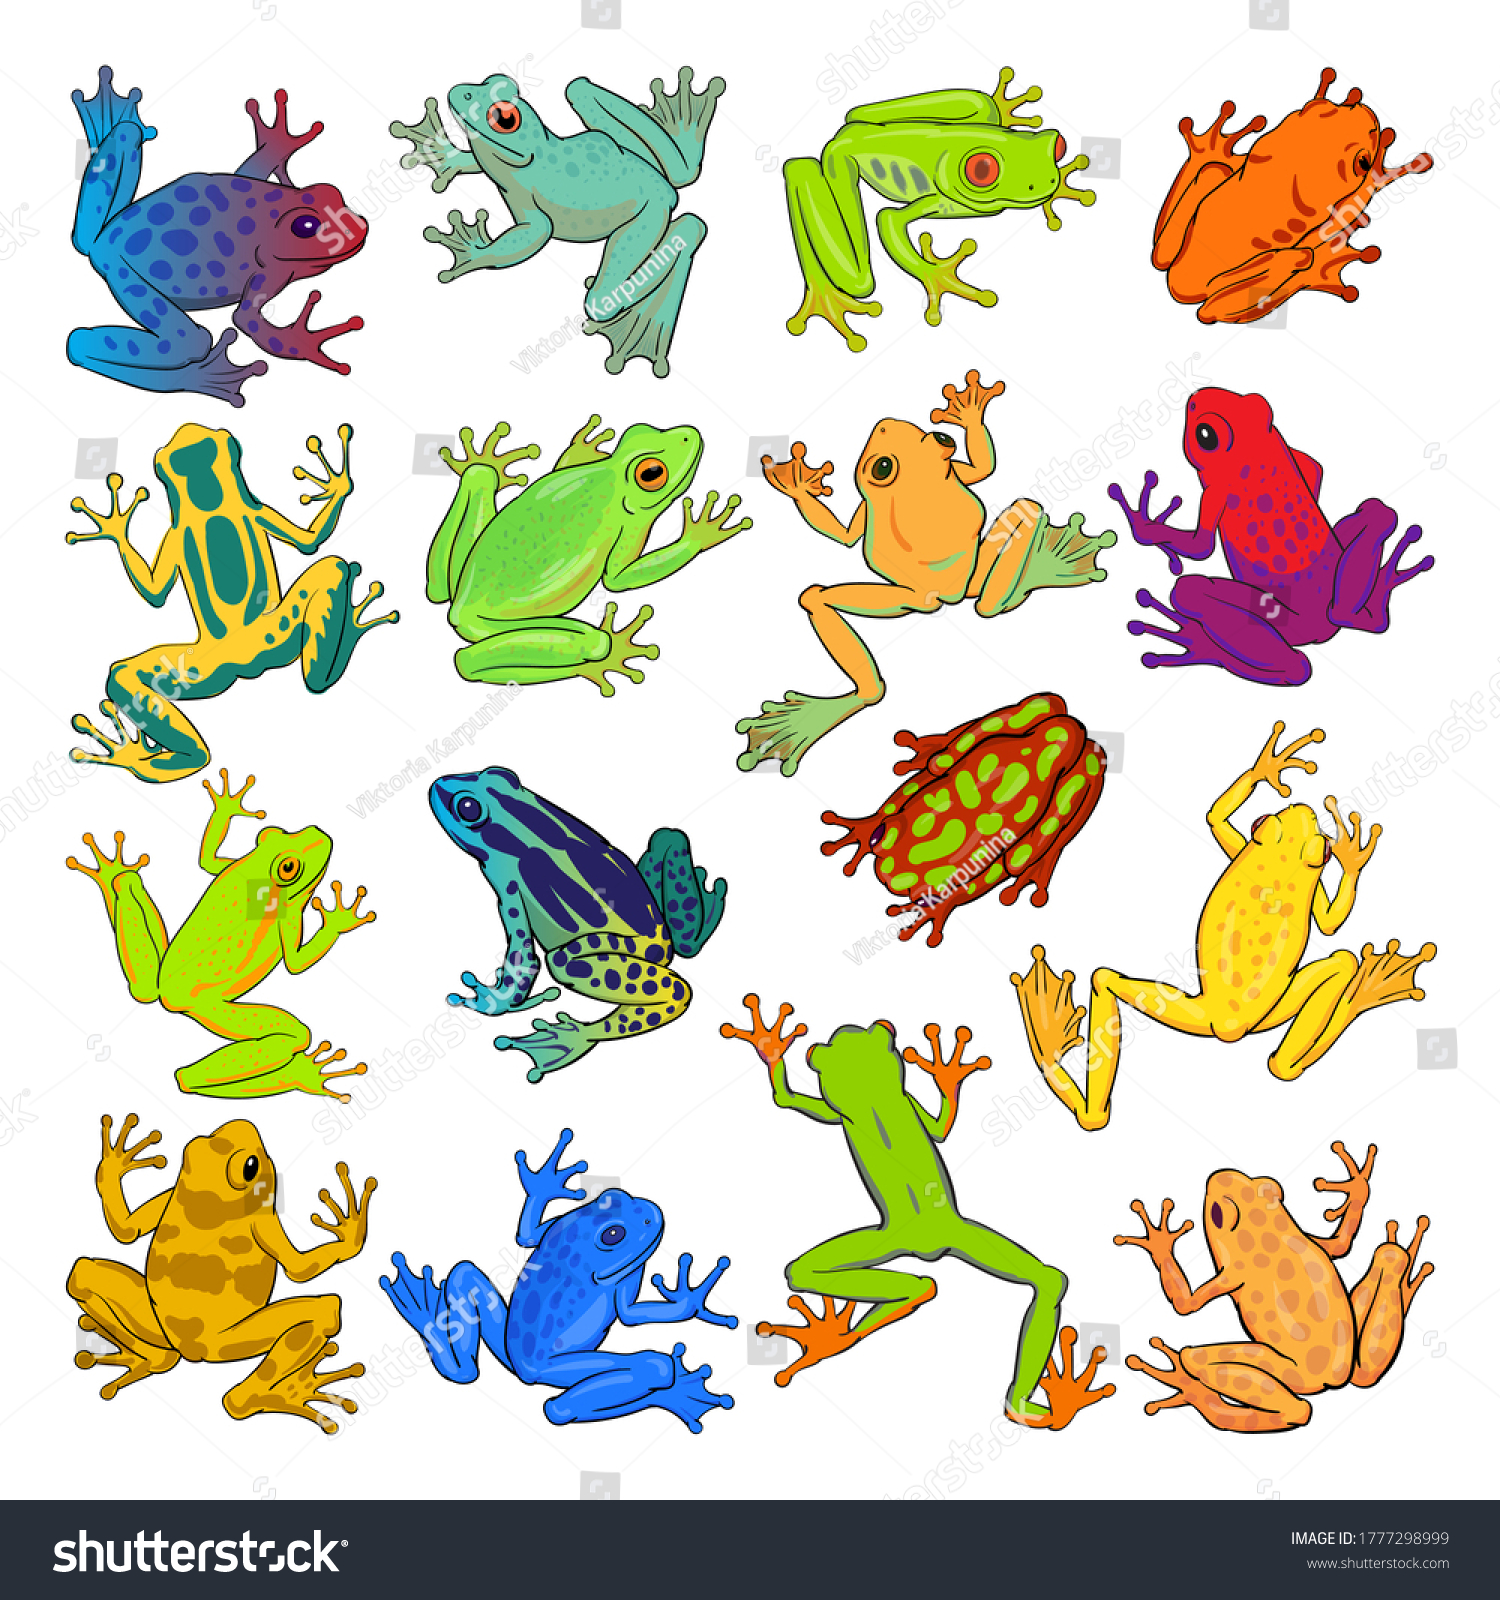 SVG of Hand drawn vector set of colorful tree frogs isolated on white background. Original stock illustration of amphibians. svg